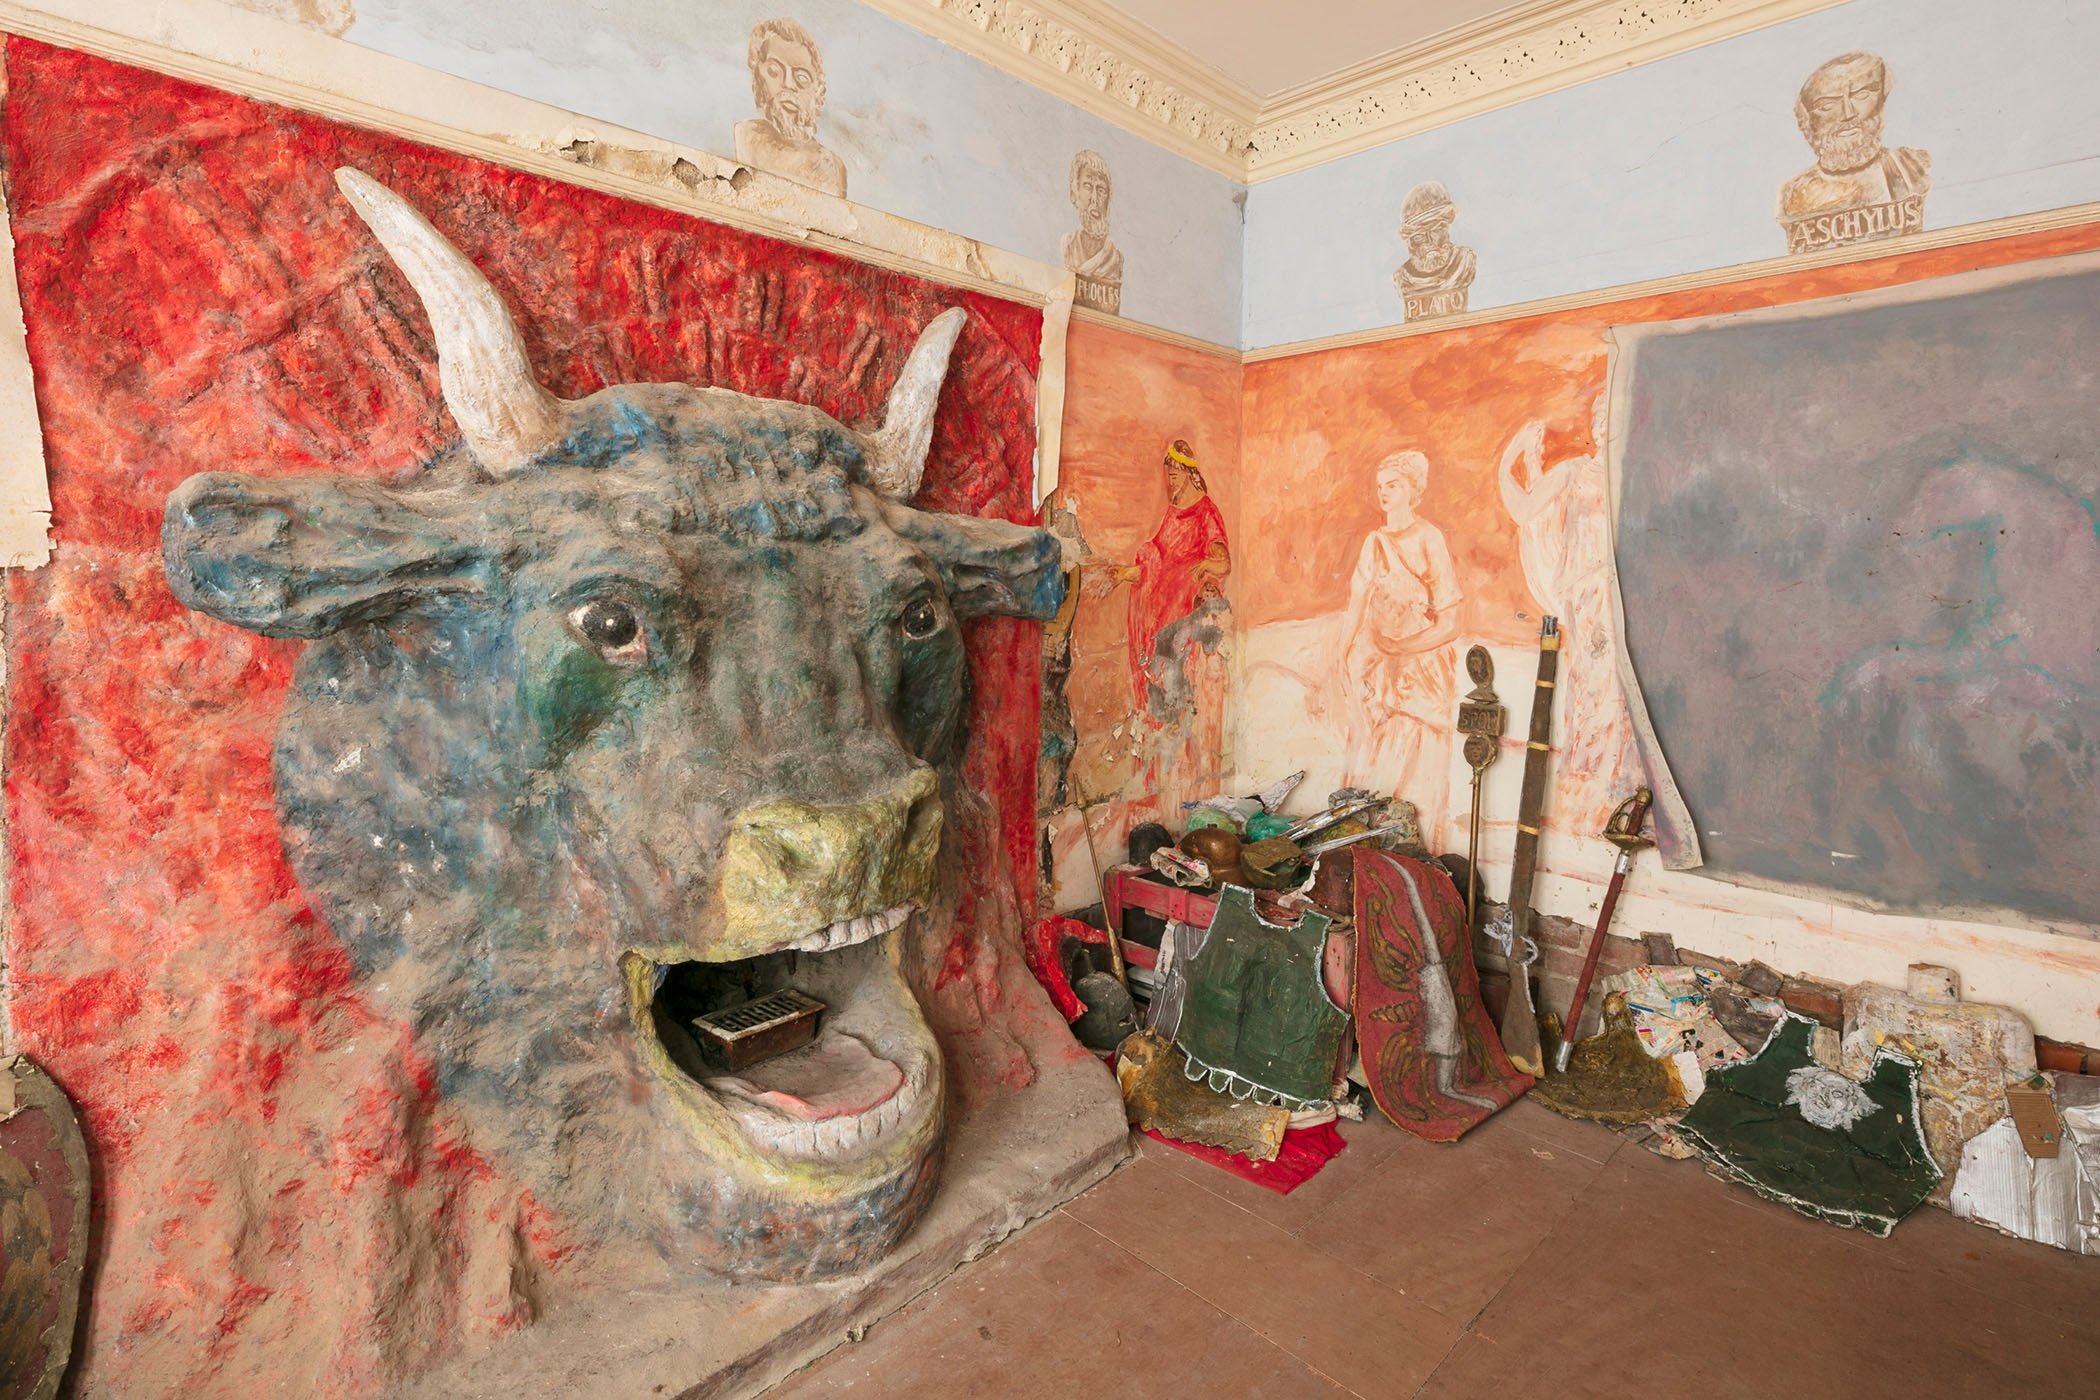 A photograph of a room containing a large Minotaur head sculpture and Roman-Greco-inspired artwork painted on the walls.